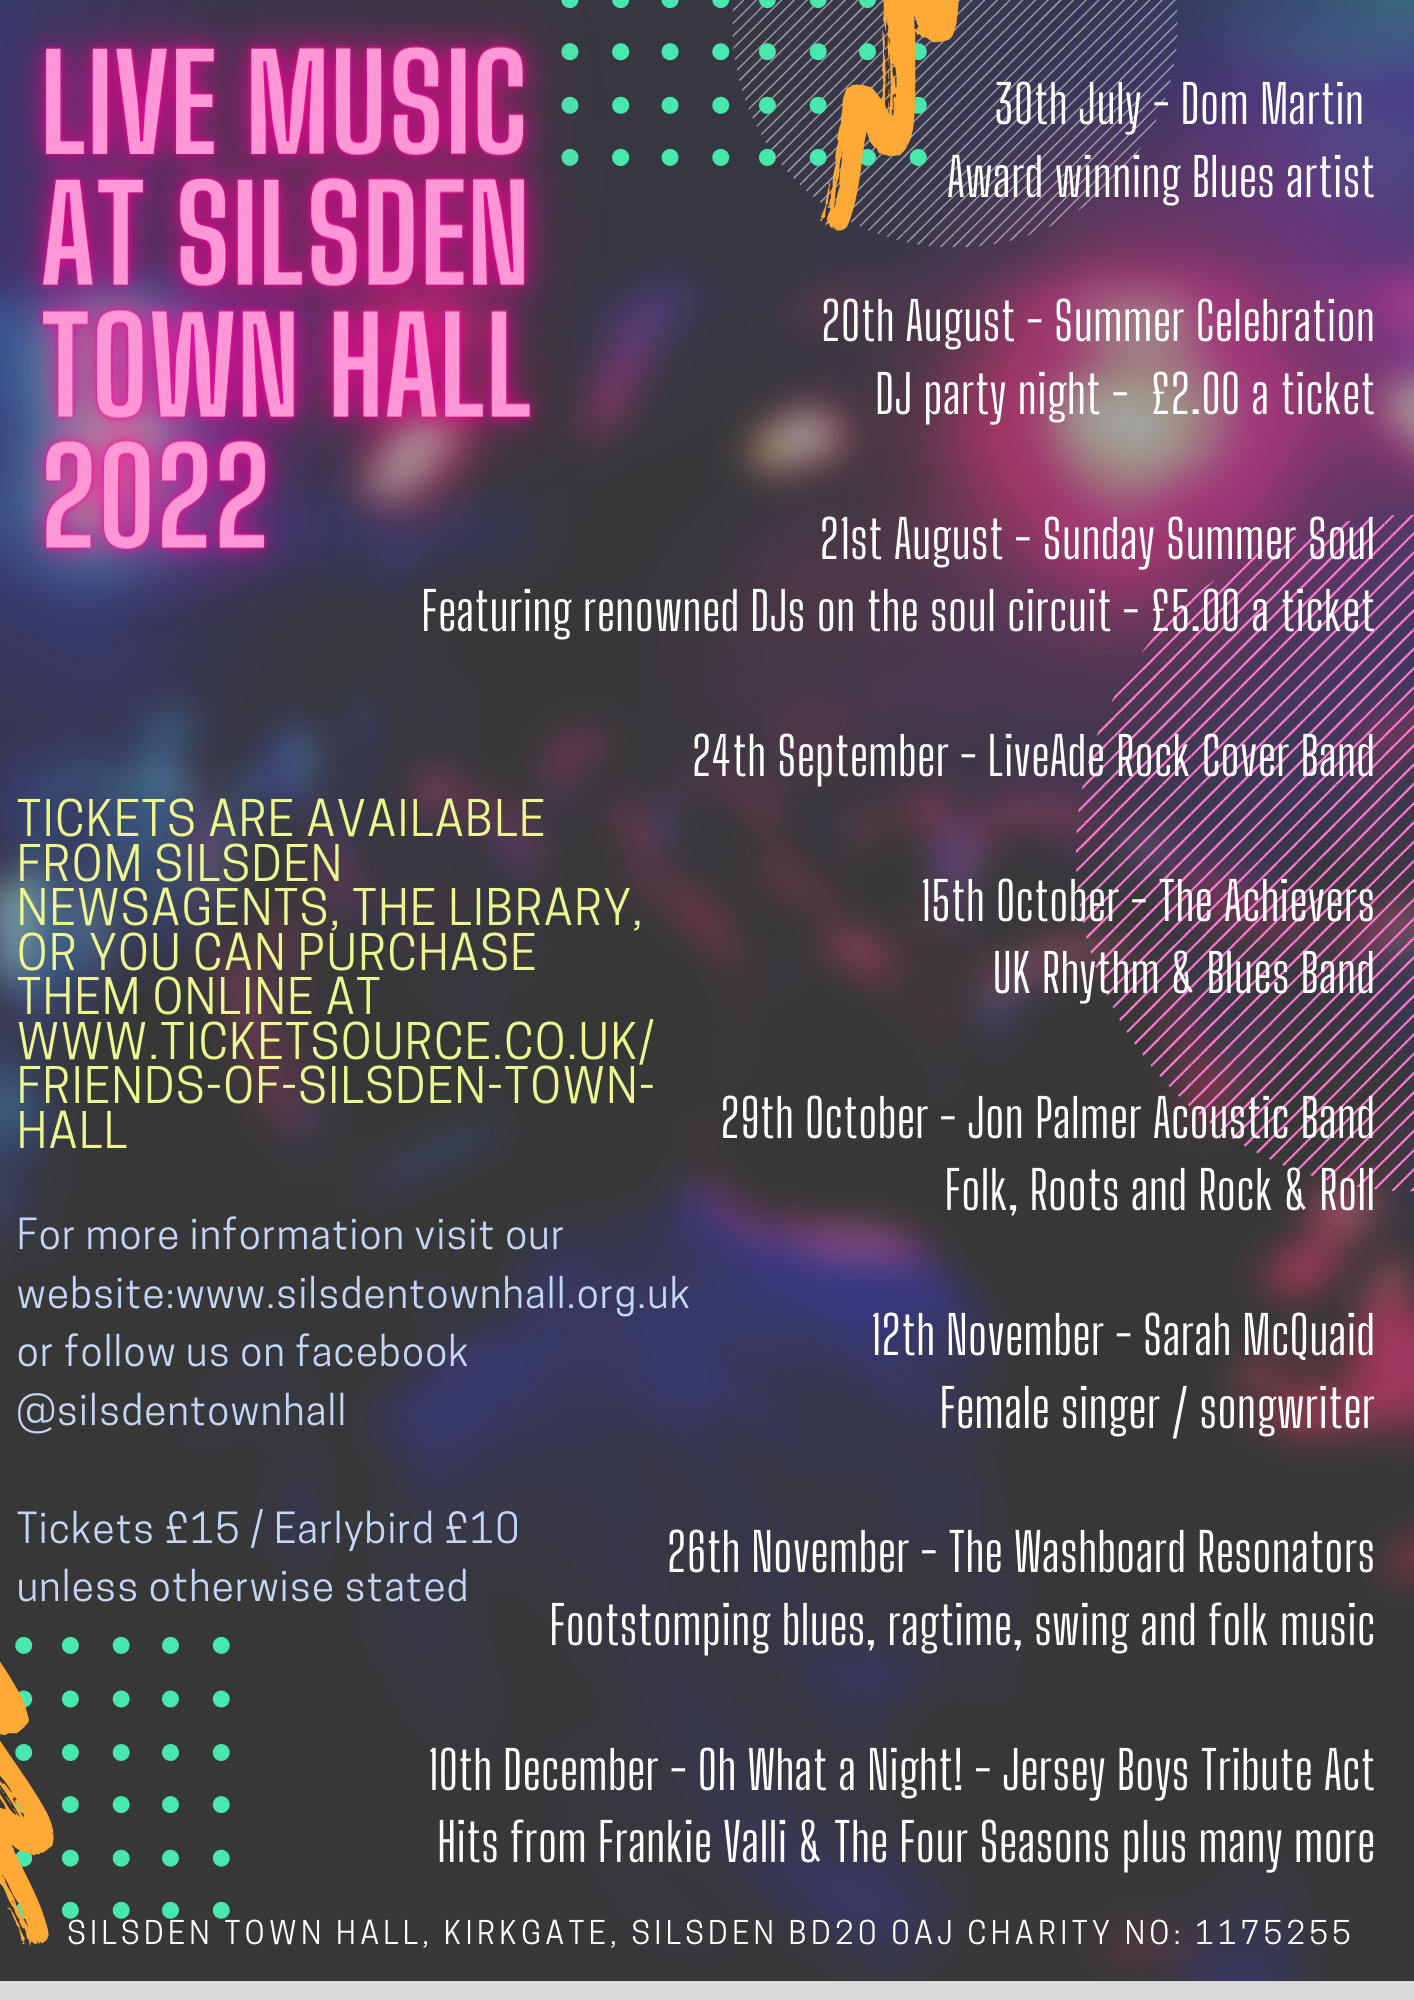 What's On, Silsden Town Hall, 2022